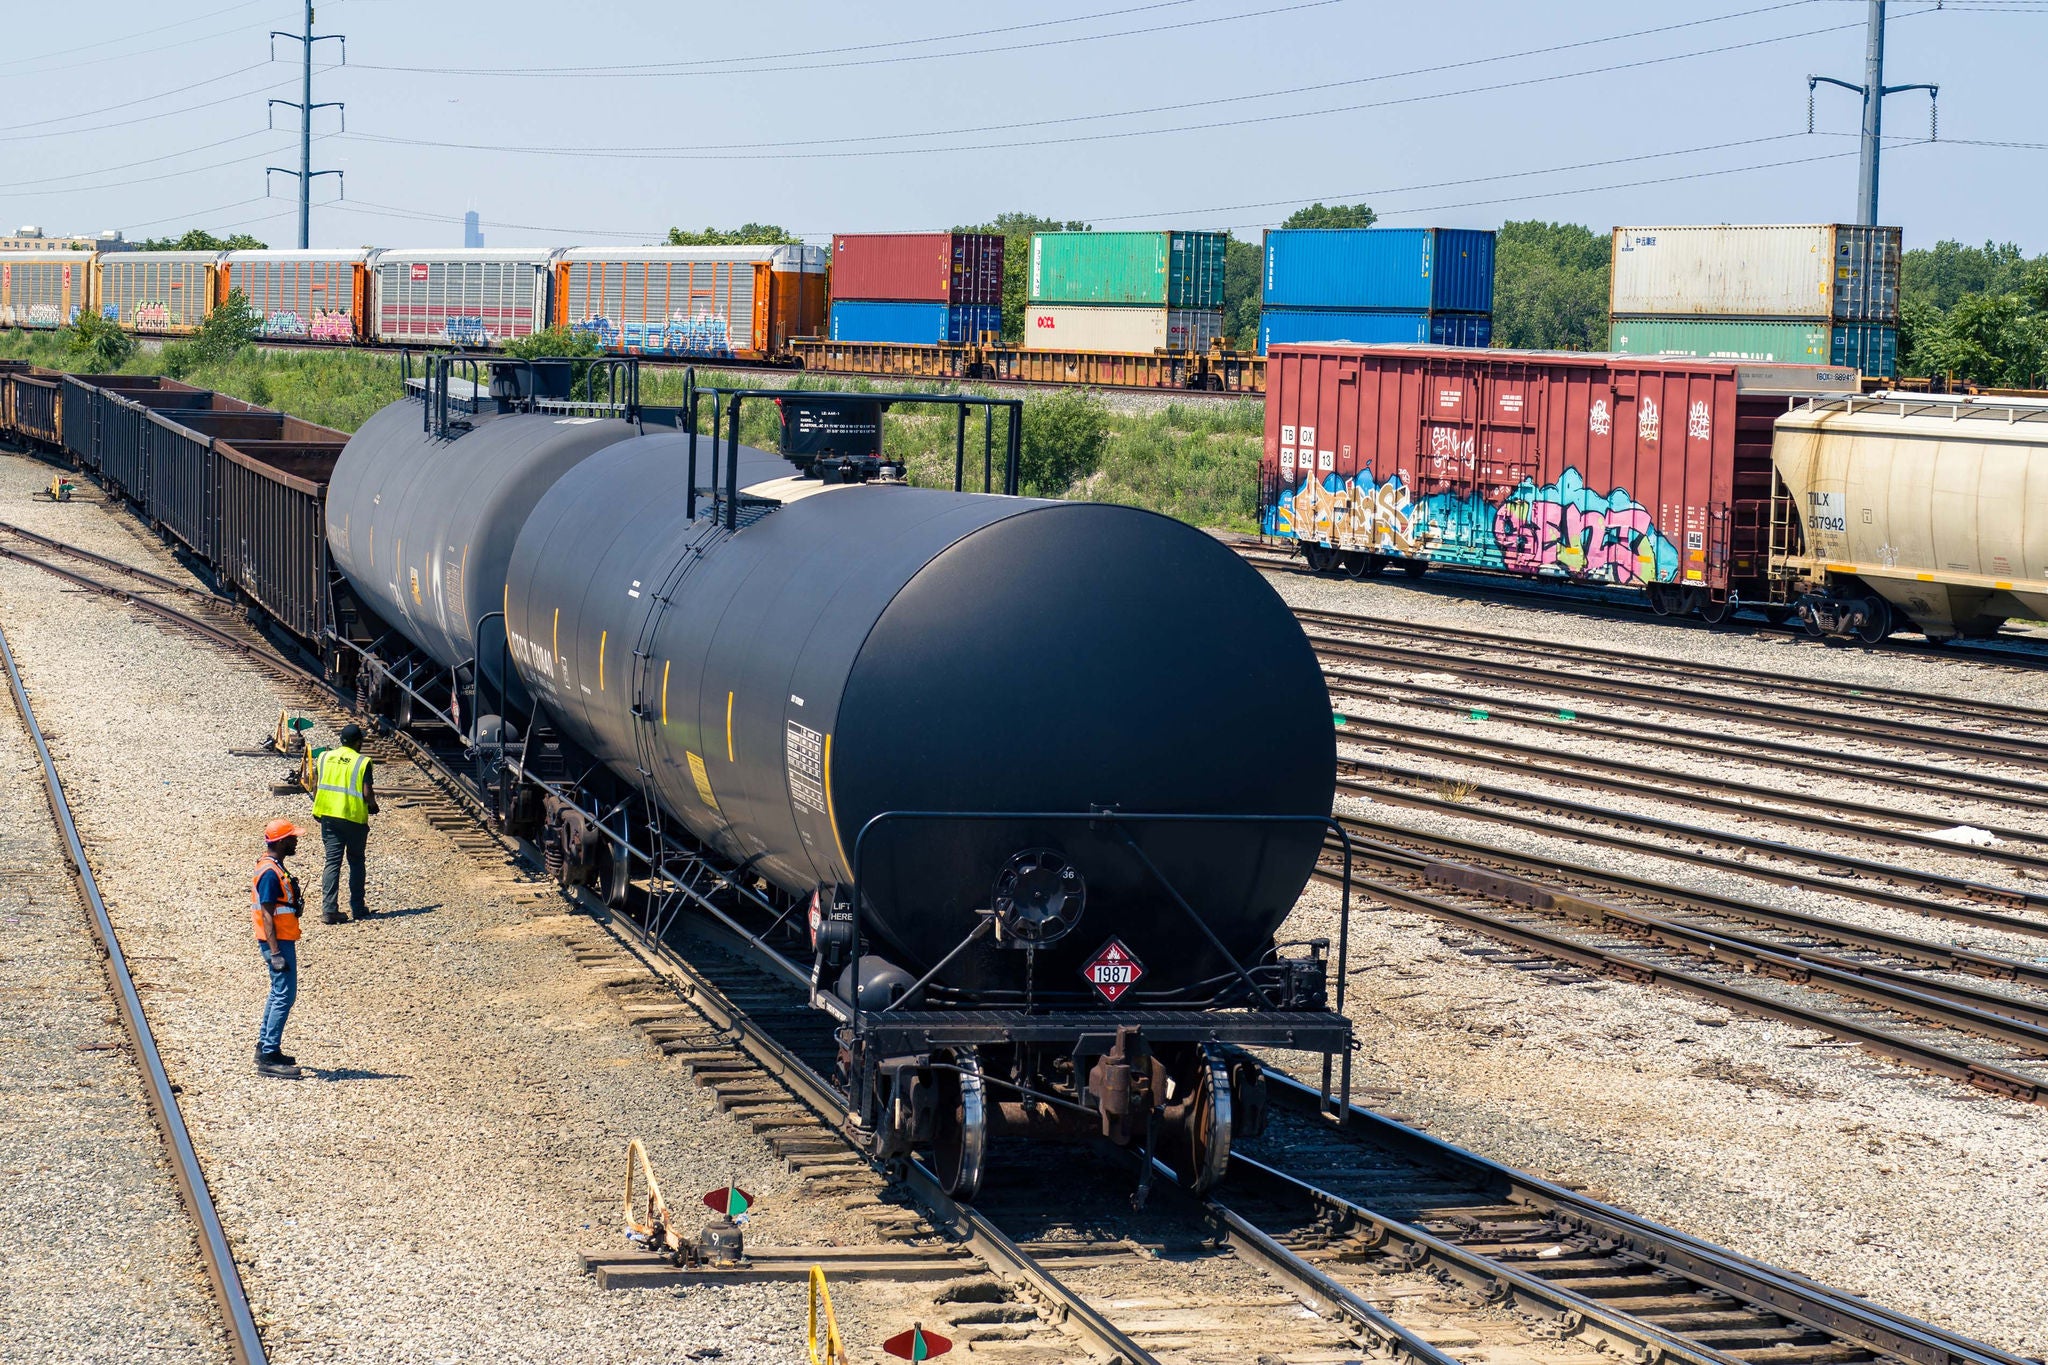 Two Norfolk Southern employees in security vests looking at a container on a train transporting low carbon fuels